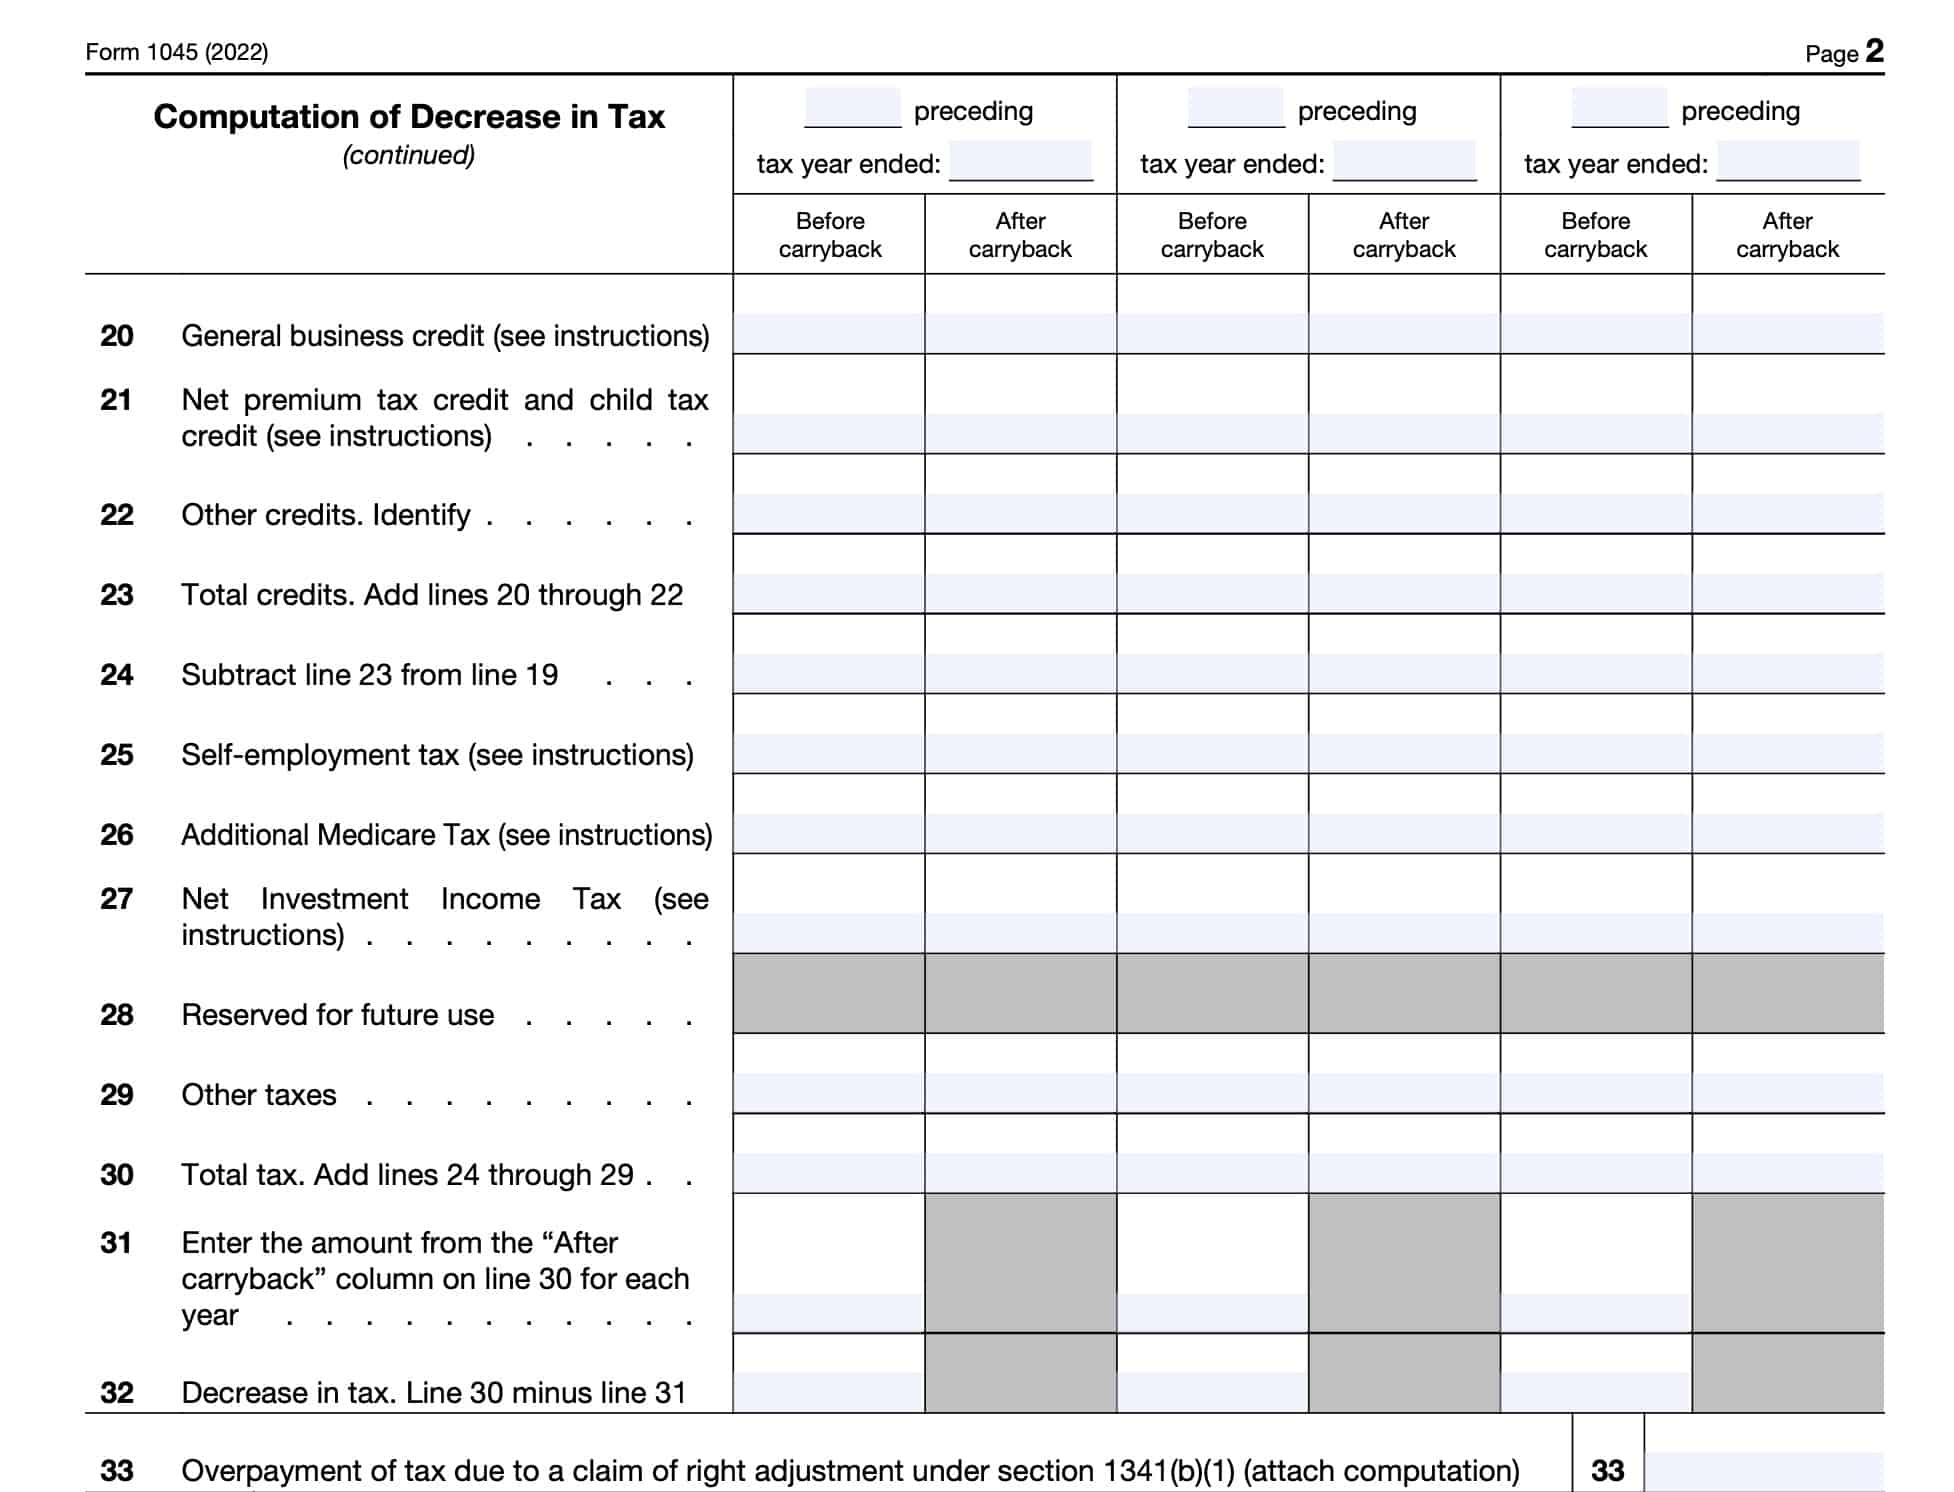 Form 1045, computation of decrease in tax, lines 20 through 33